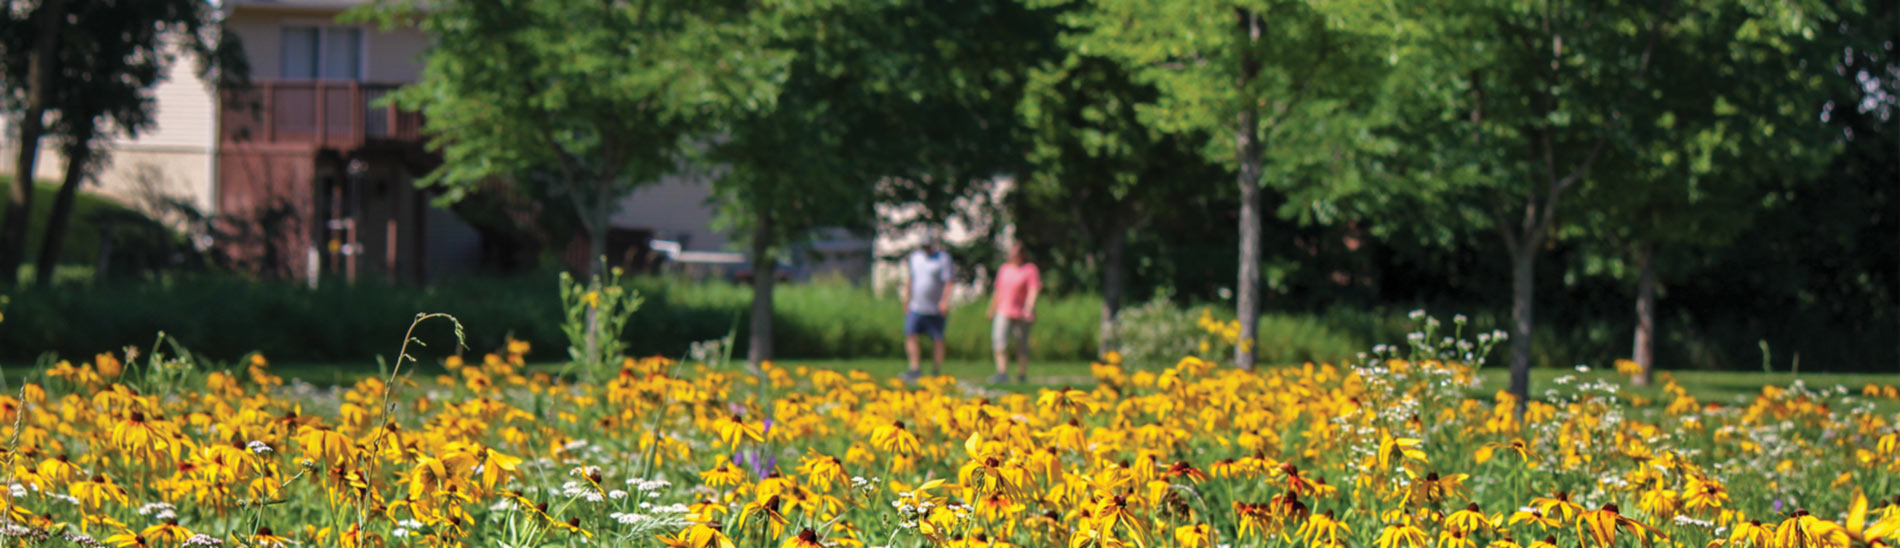 Pollinator habitat in the foreground with people walking in the background